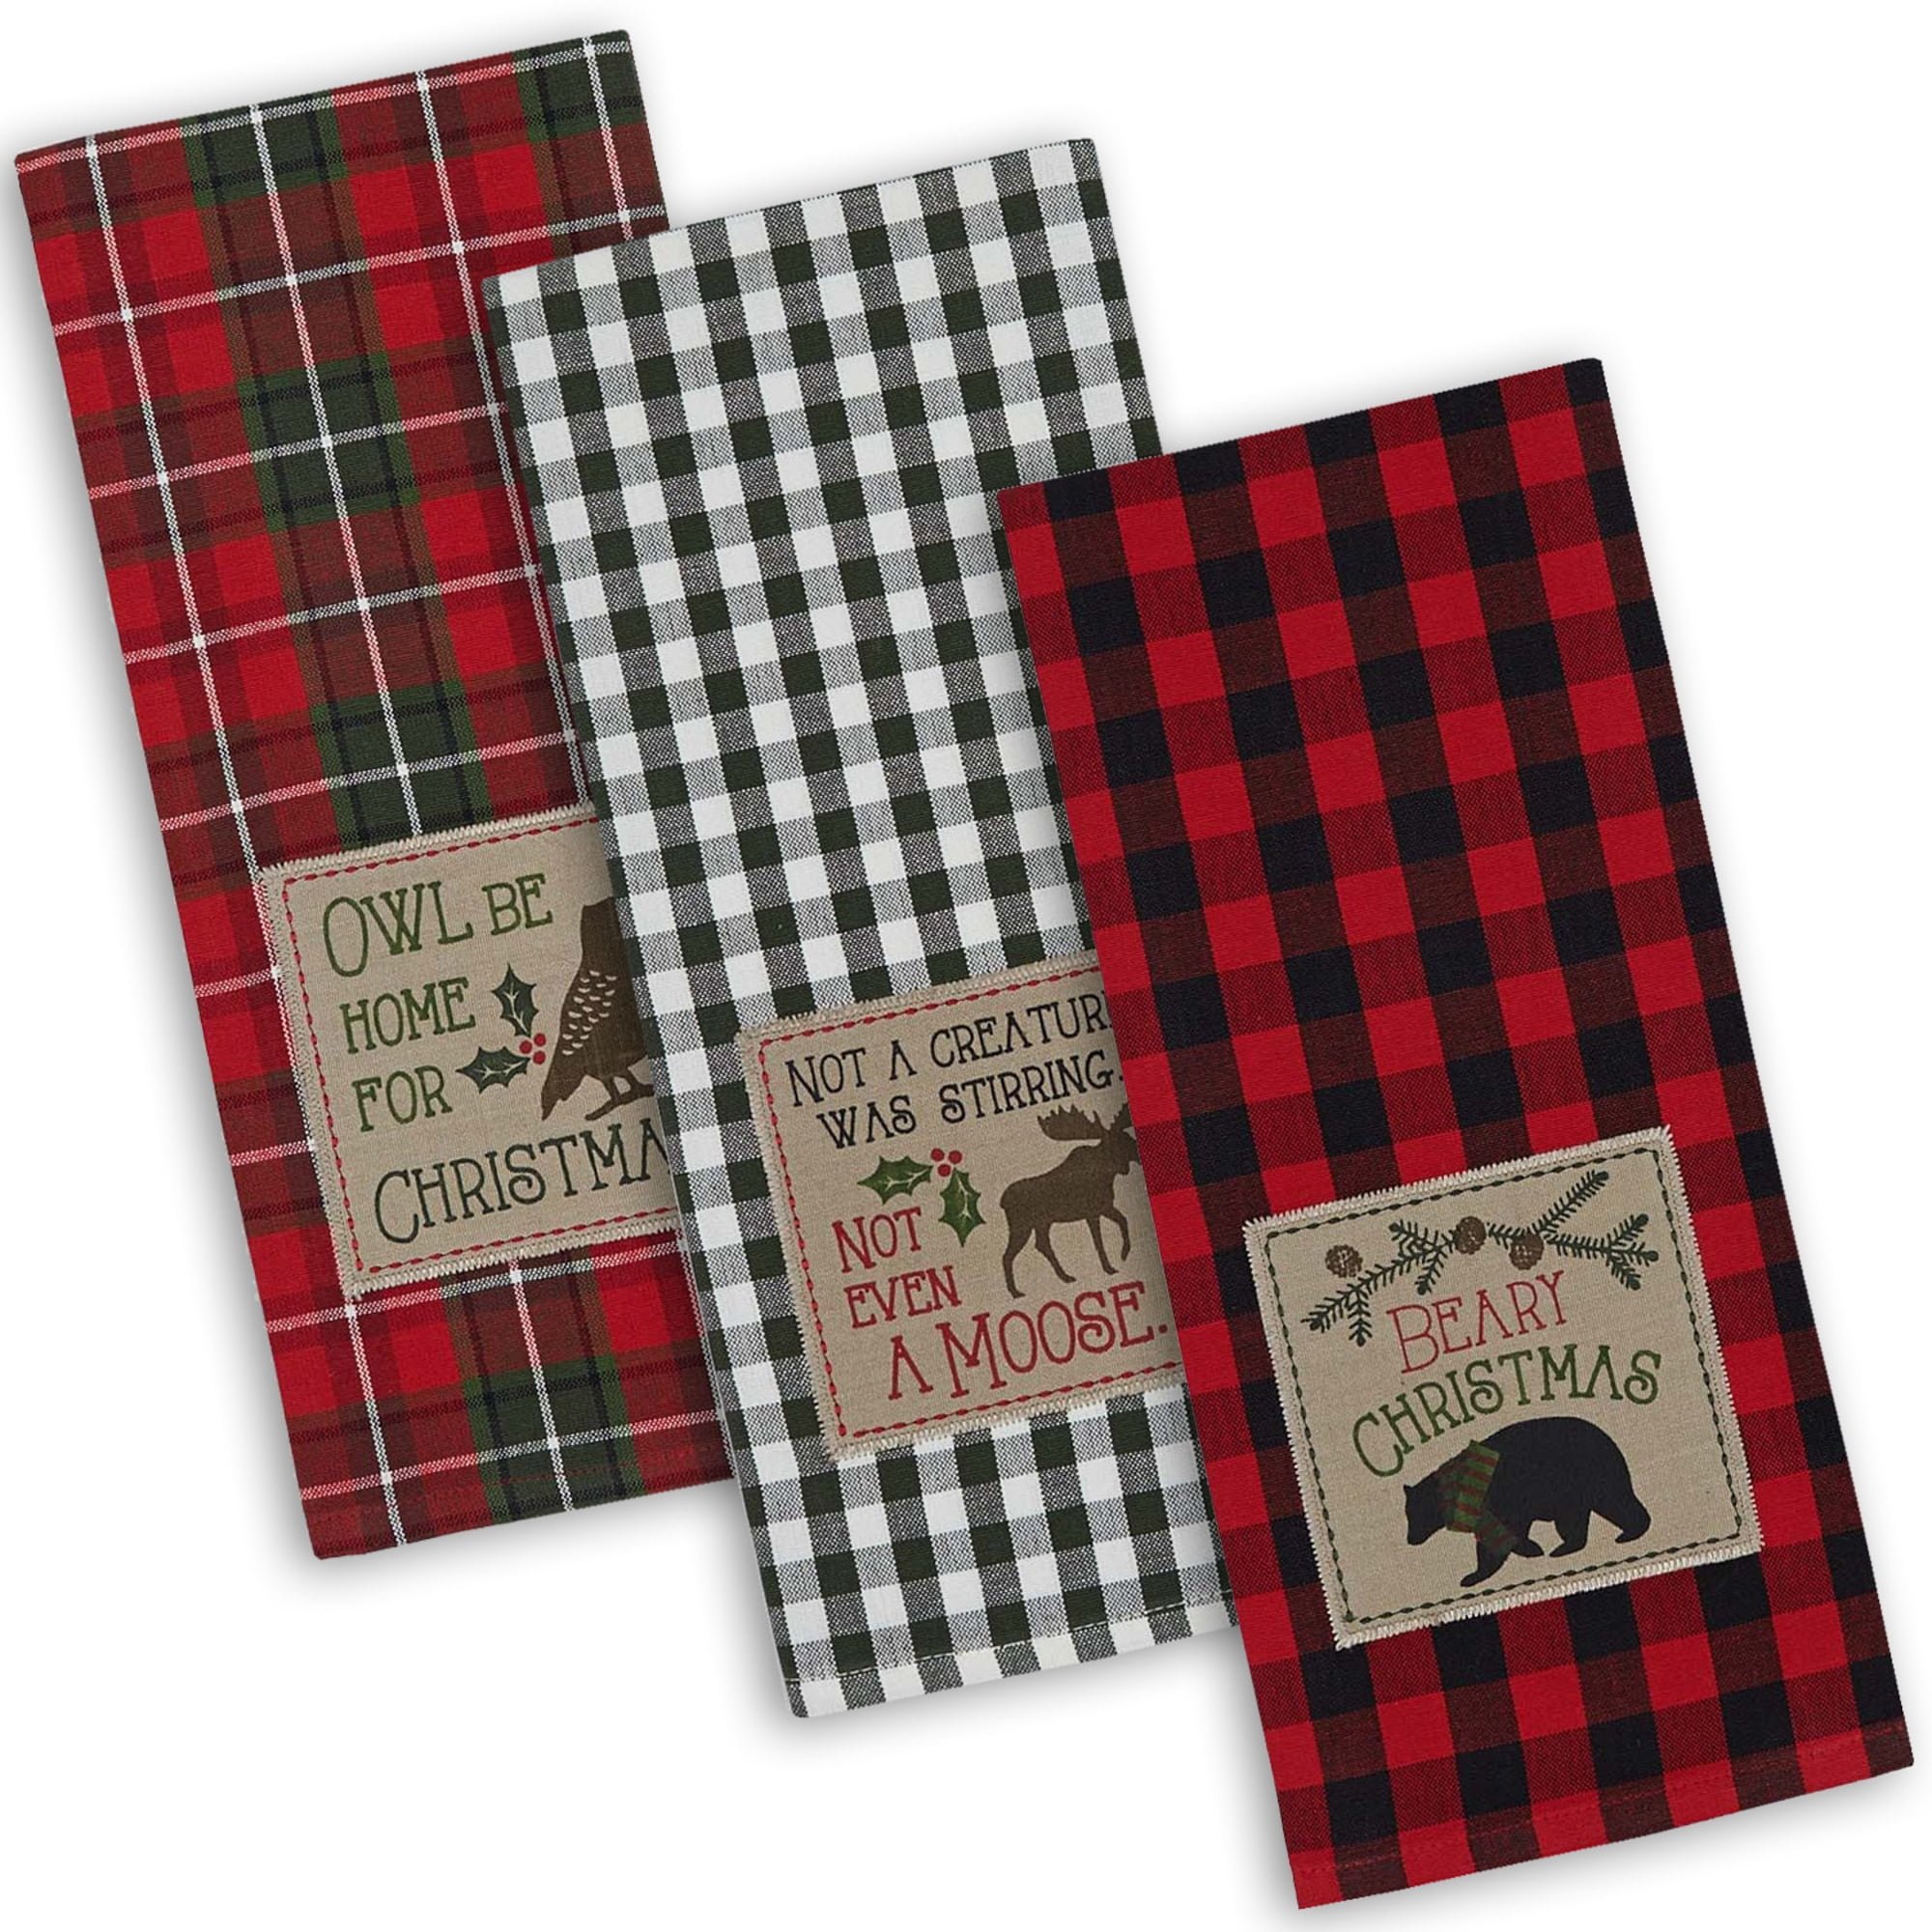 Design Imports Camz35803 Cabin Christmas Embroidered Dish Towel Set - Set Of 3